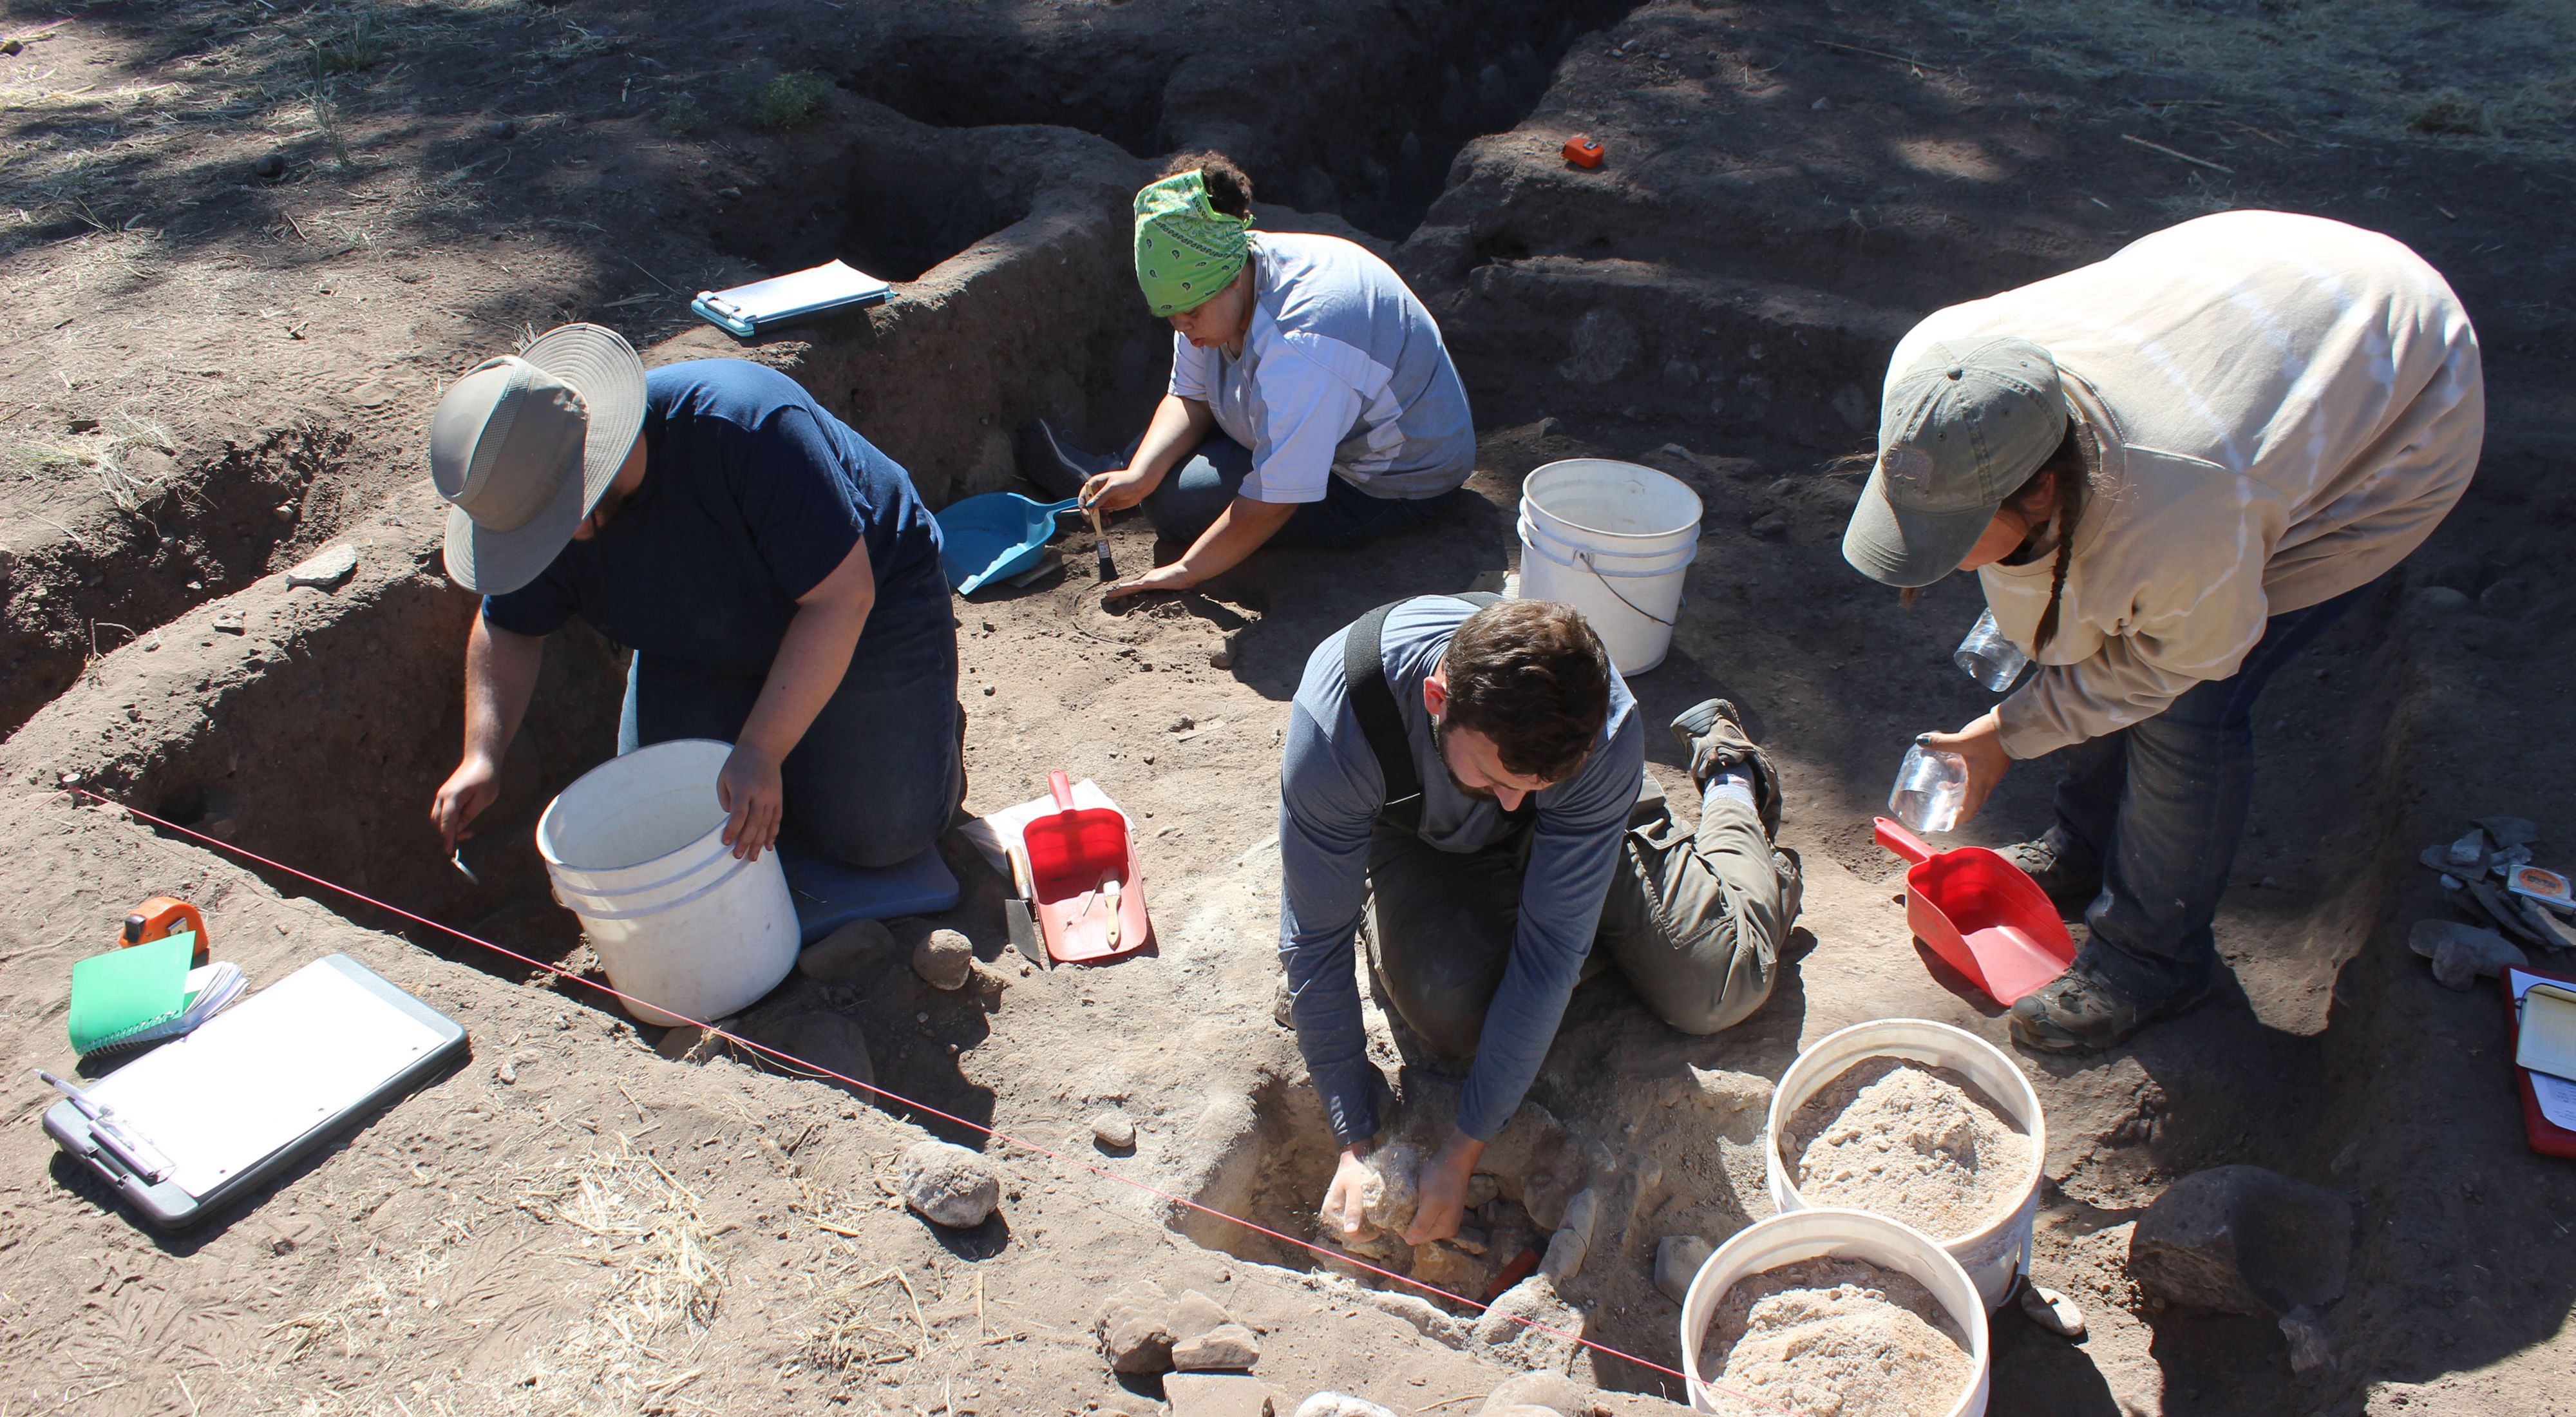 Four people with buckets excavate a site.